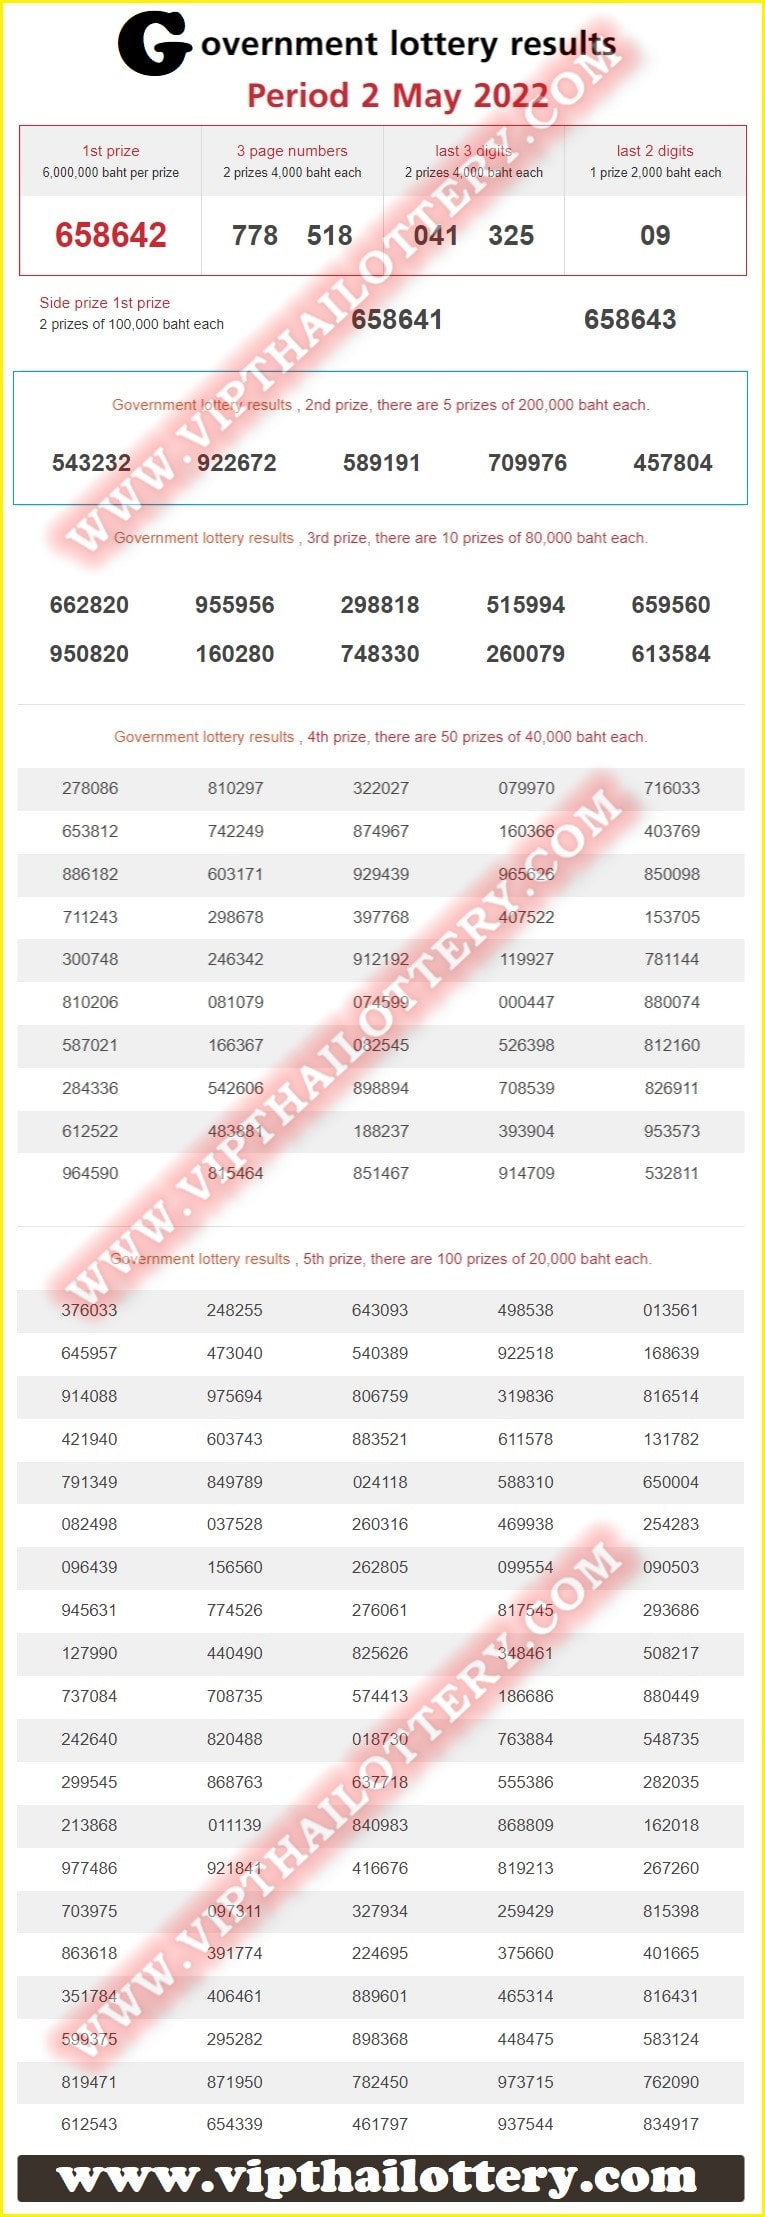 Thai Lottery Today Result Winners Detail 02-05-2022 Live Update